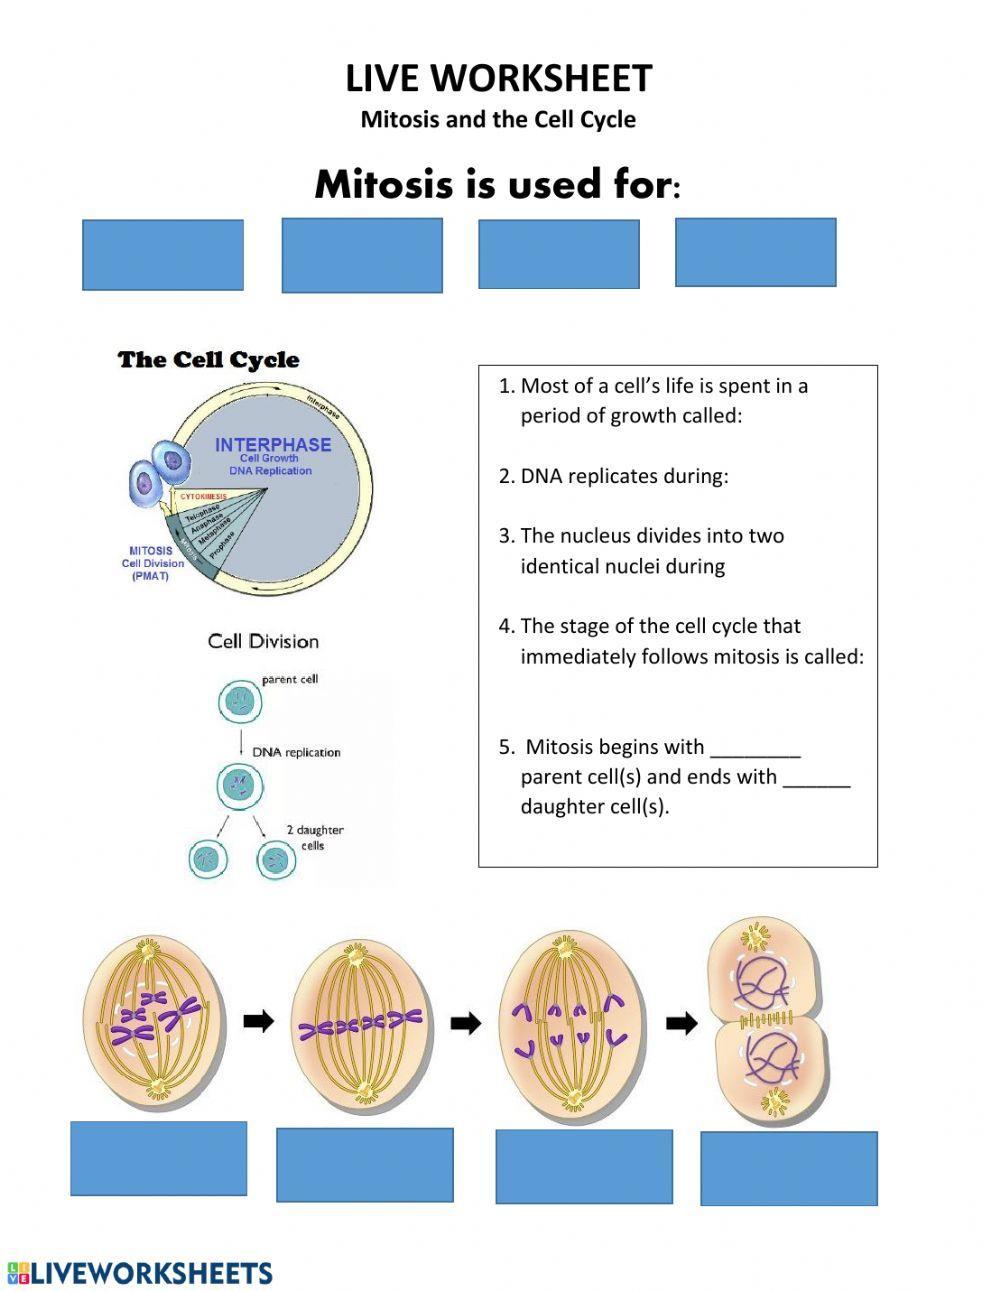 LIVE WORK SHEET: Mitosis and Cell Division